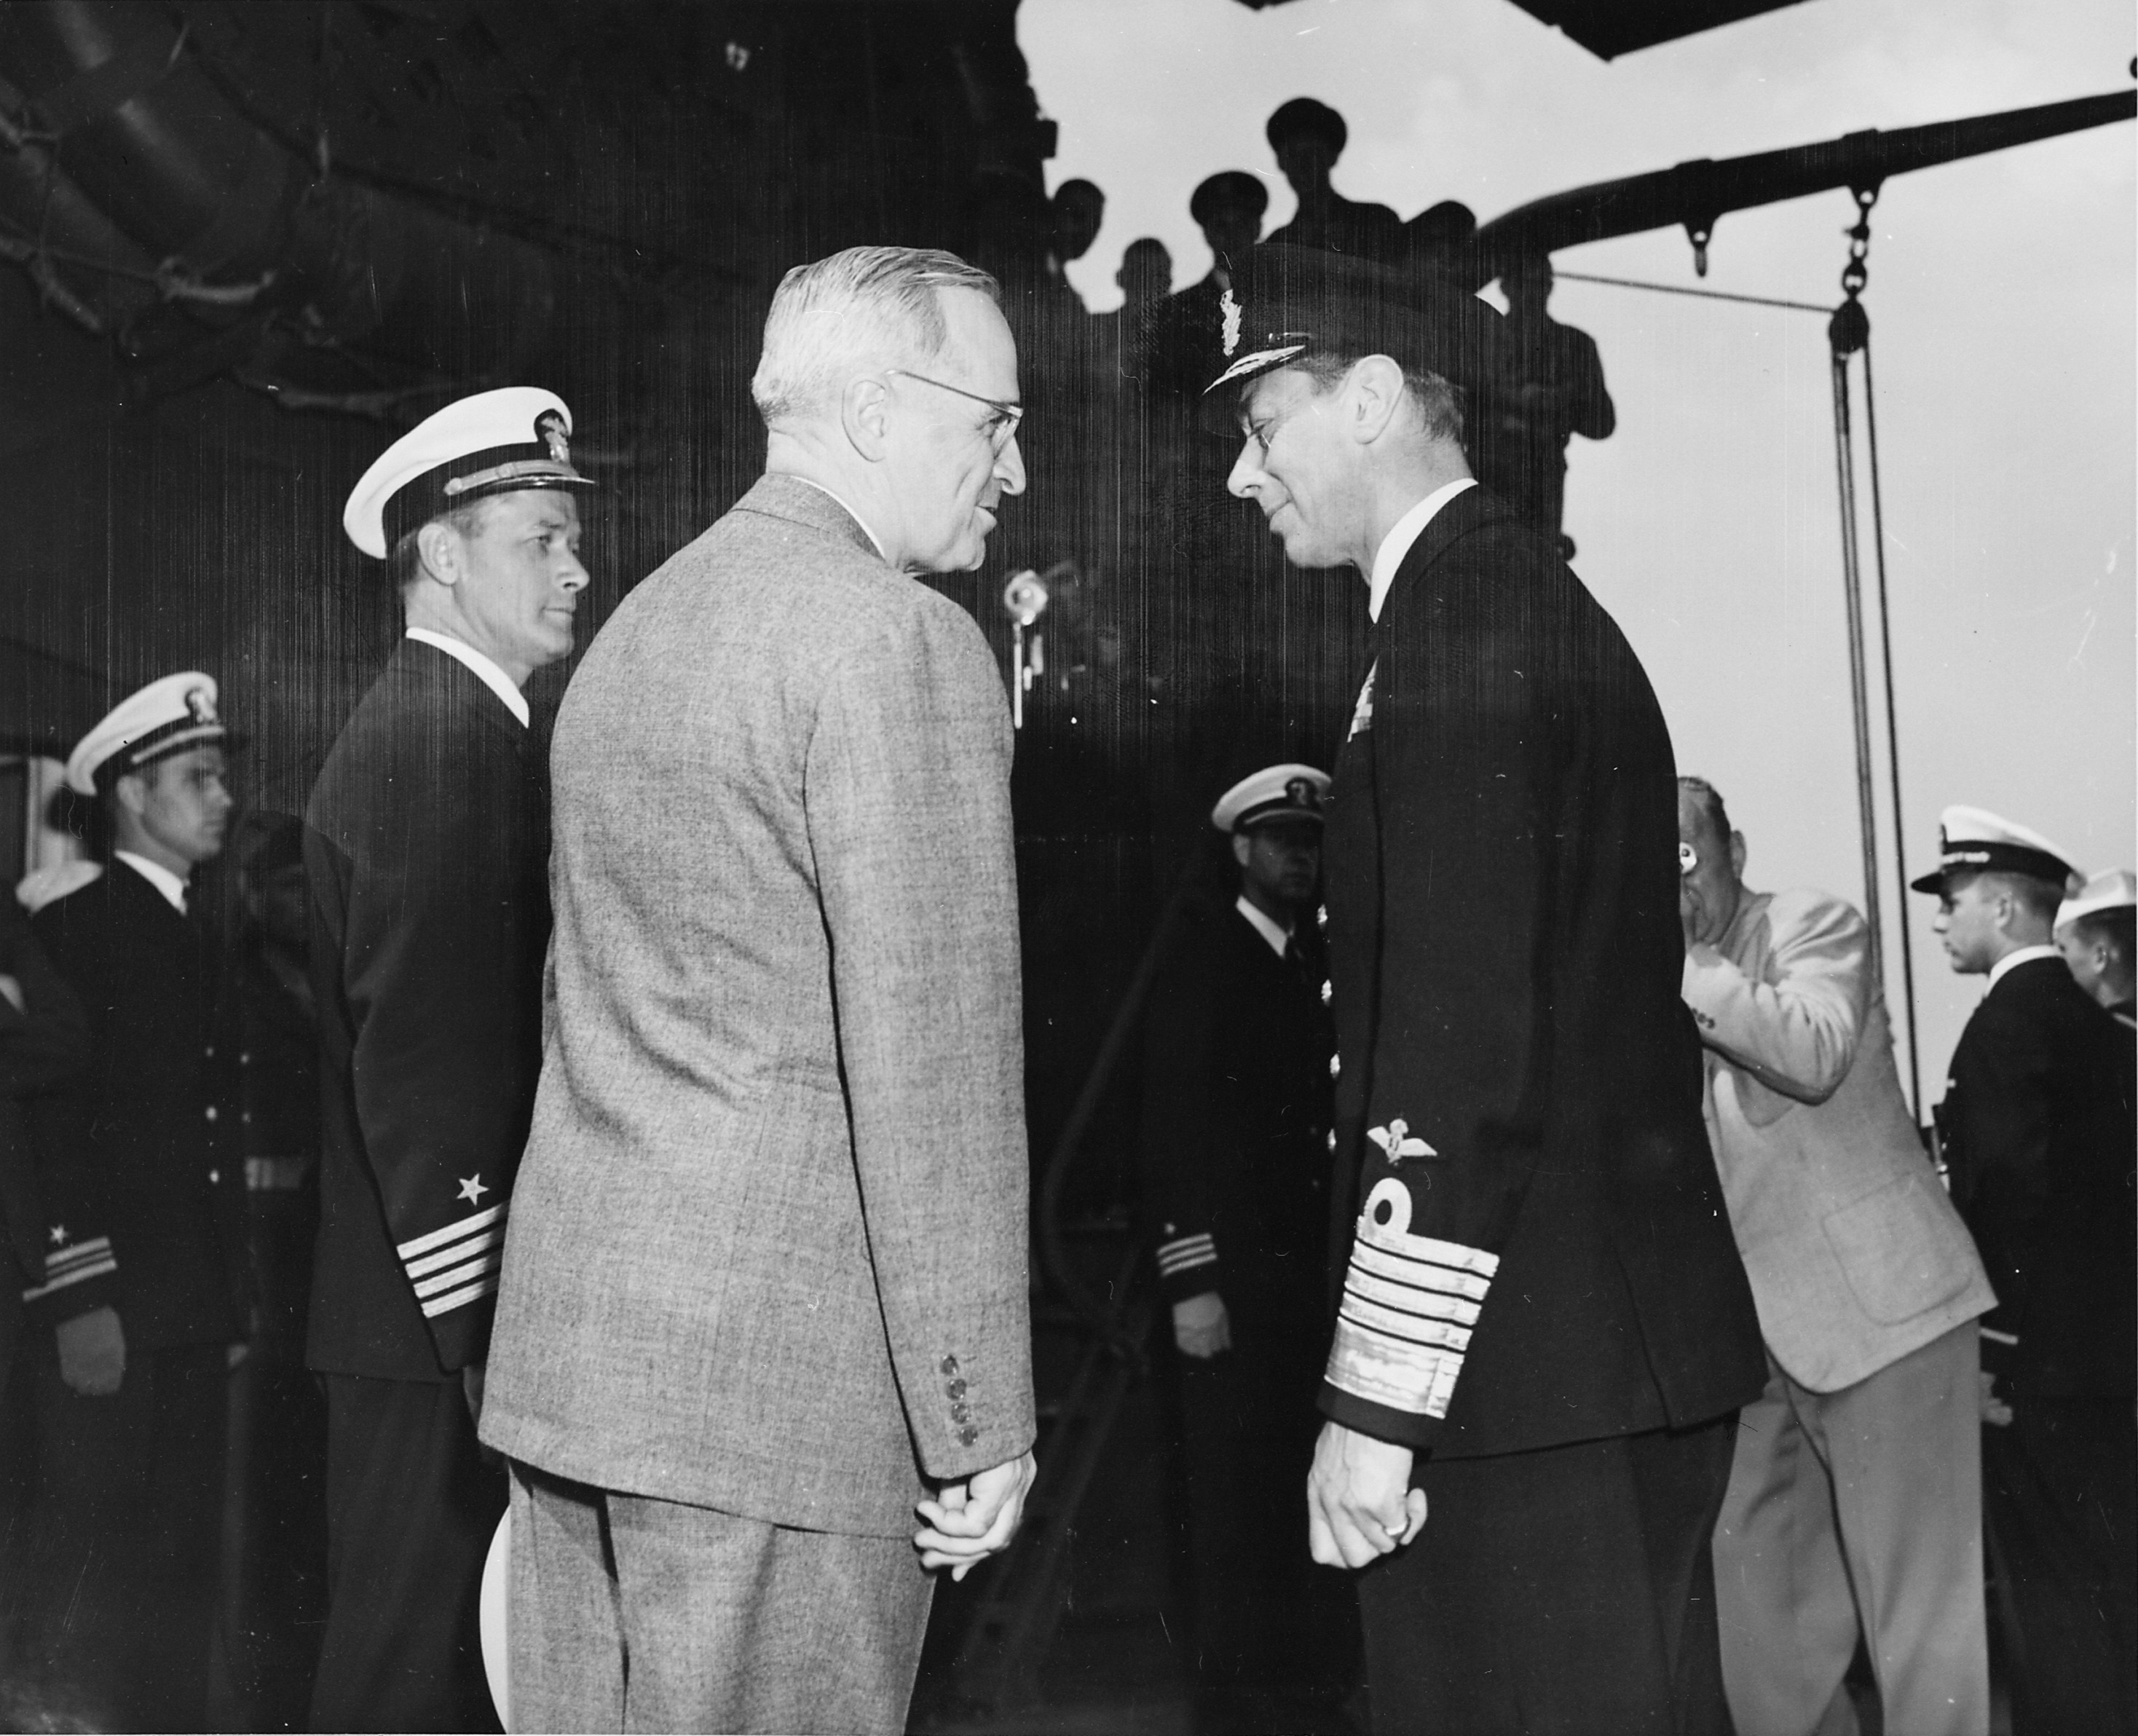 US President Harry Truman and King George VI of the United Kingdom aboard USS Augusta, Plymouth, England, United Kingdom, 2 Aug 1945, photo 2 of 2